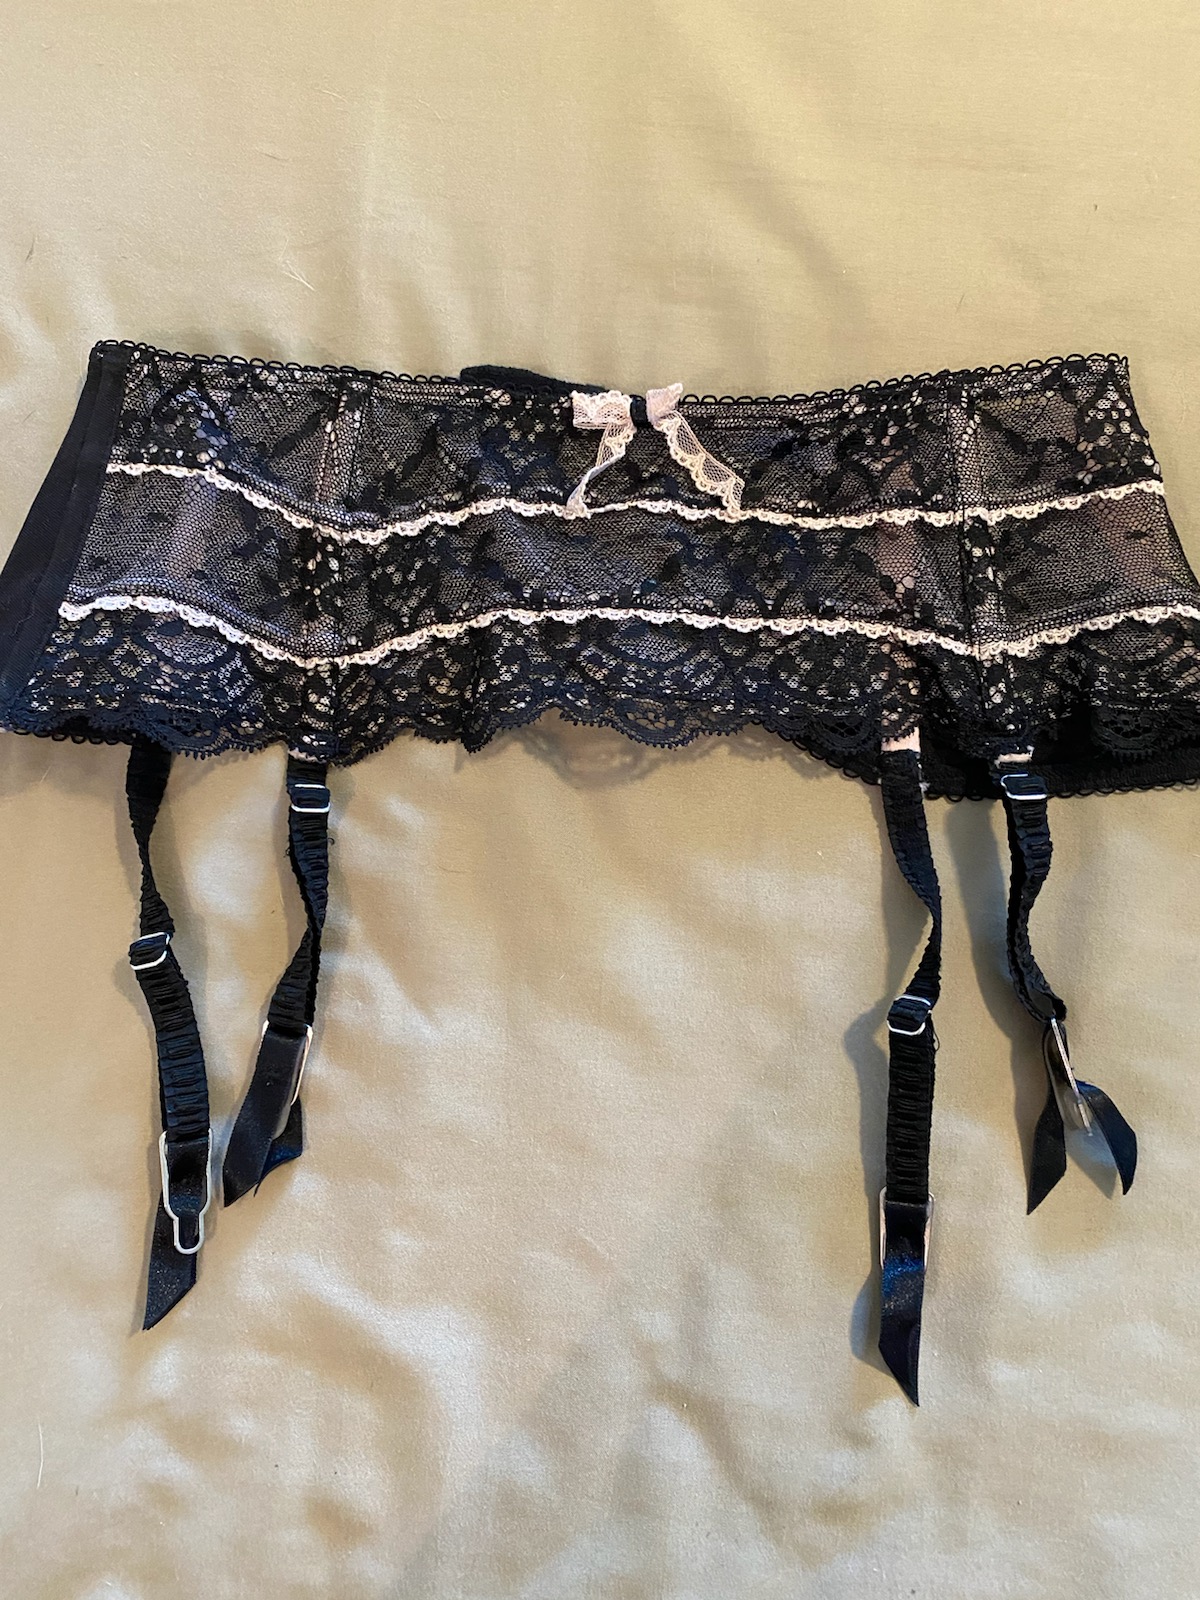 Black 3 panel lace with pink accent Garter Belt (19)